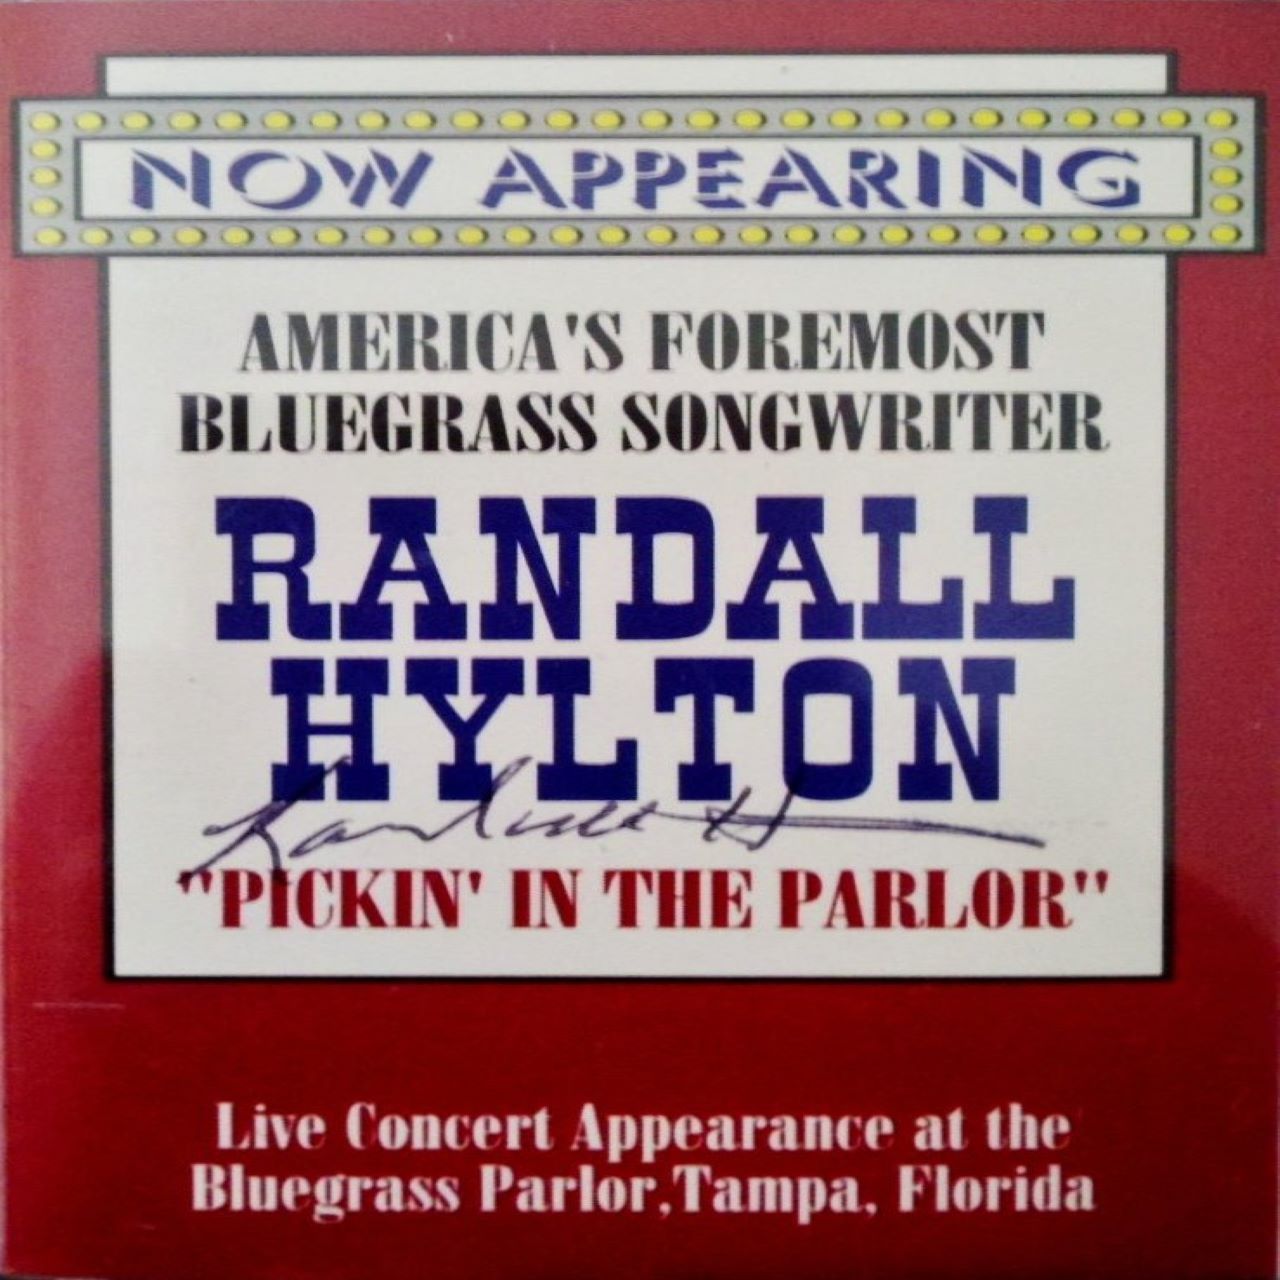 Randall Hylton - Pickin' In The Parlor cover album